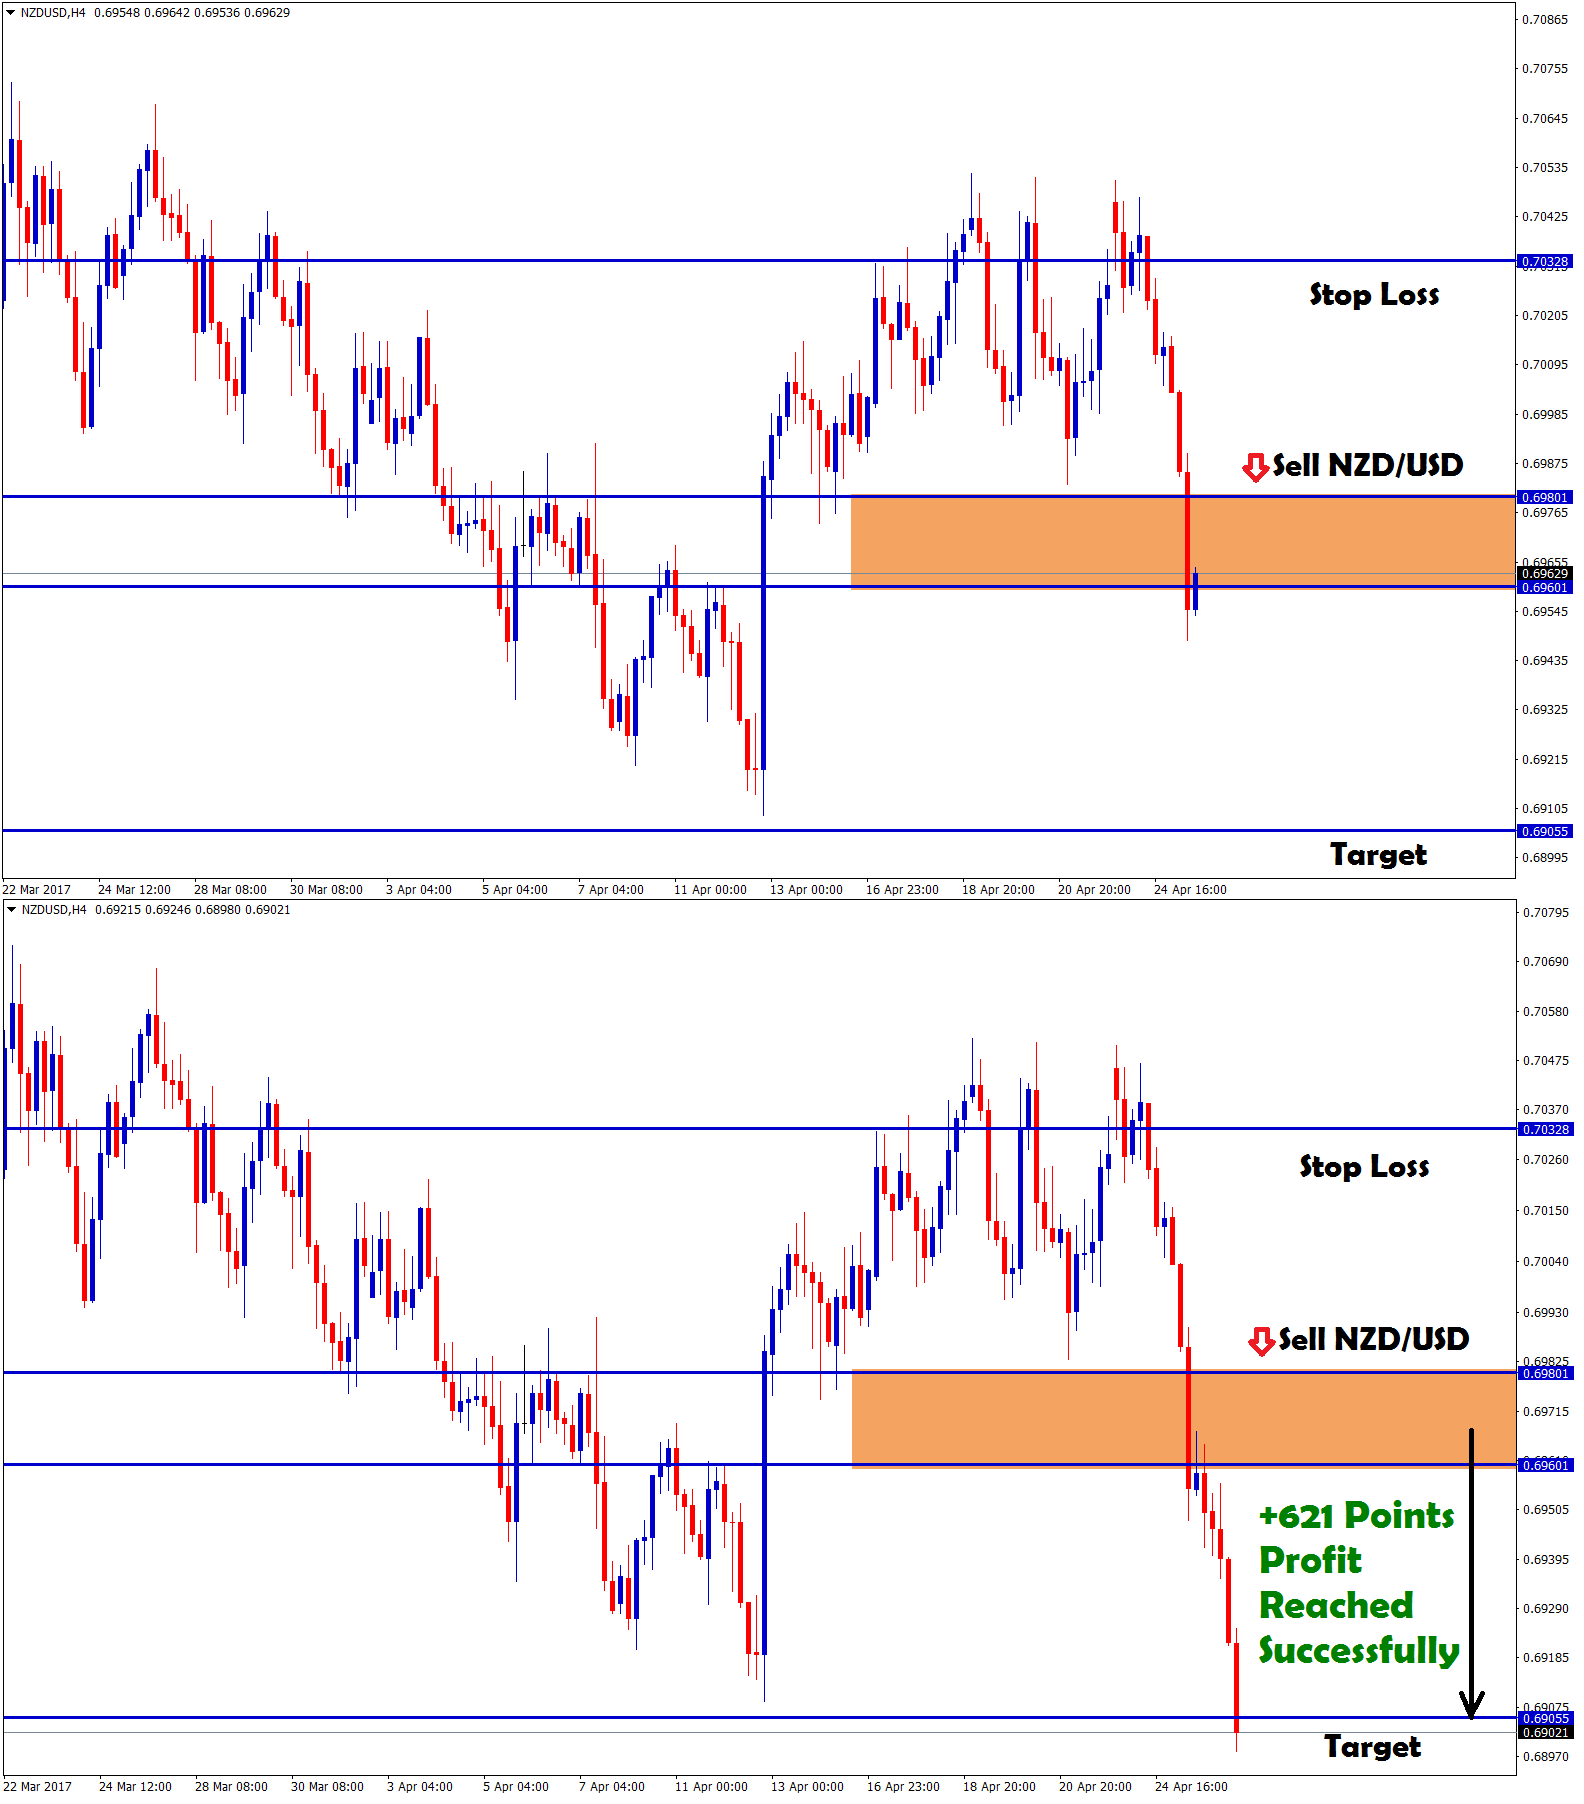 triple top chart pattern reversal and breakout at support confirmed the sell trade